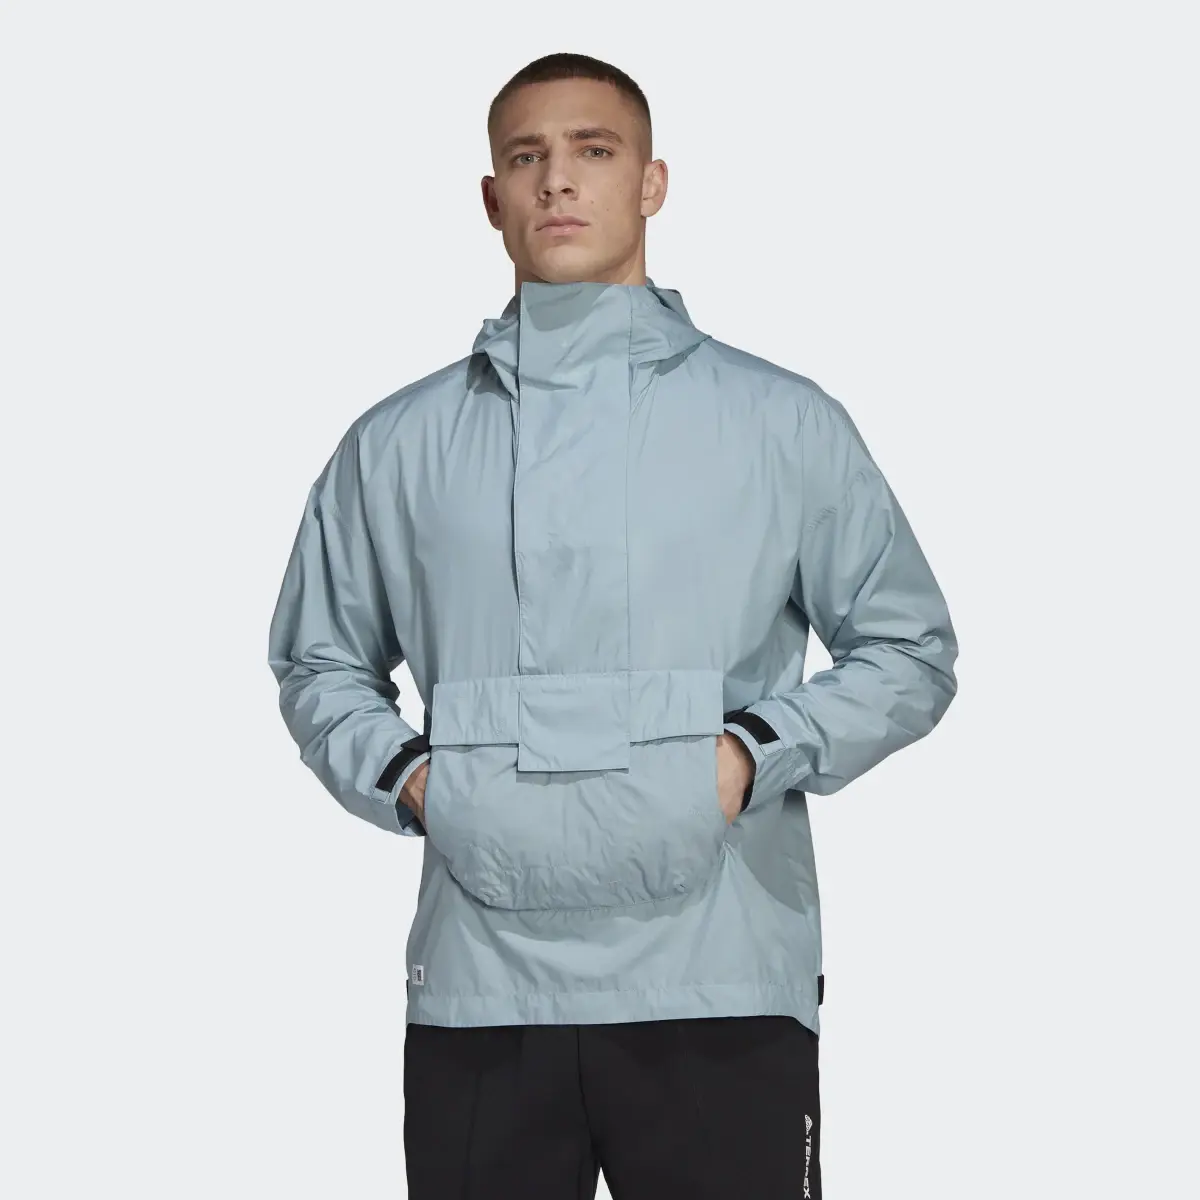 Adidas Terrex Made to be Remade Wind Anorak. 2